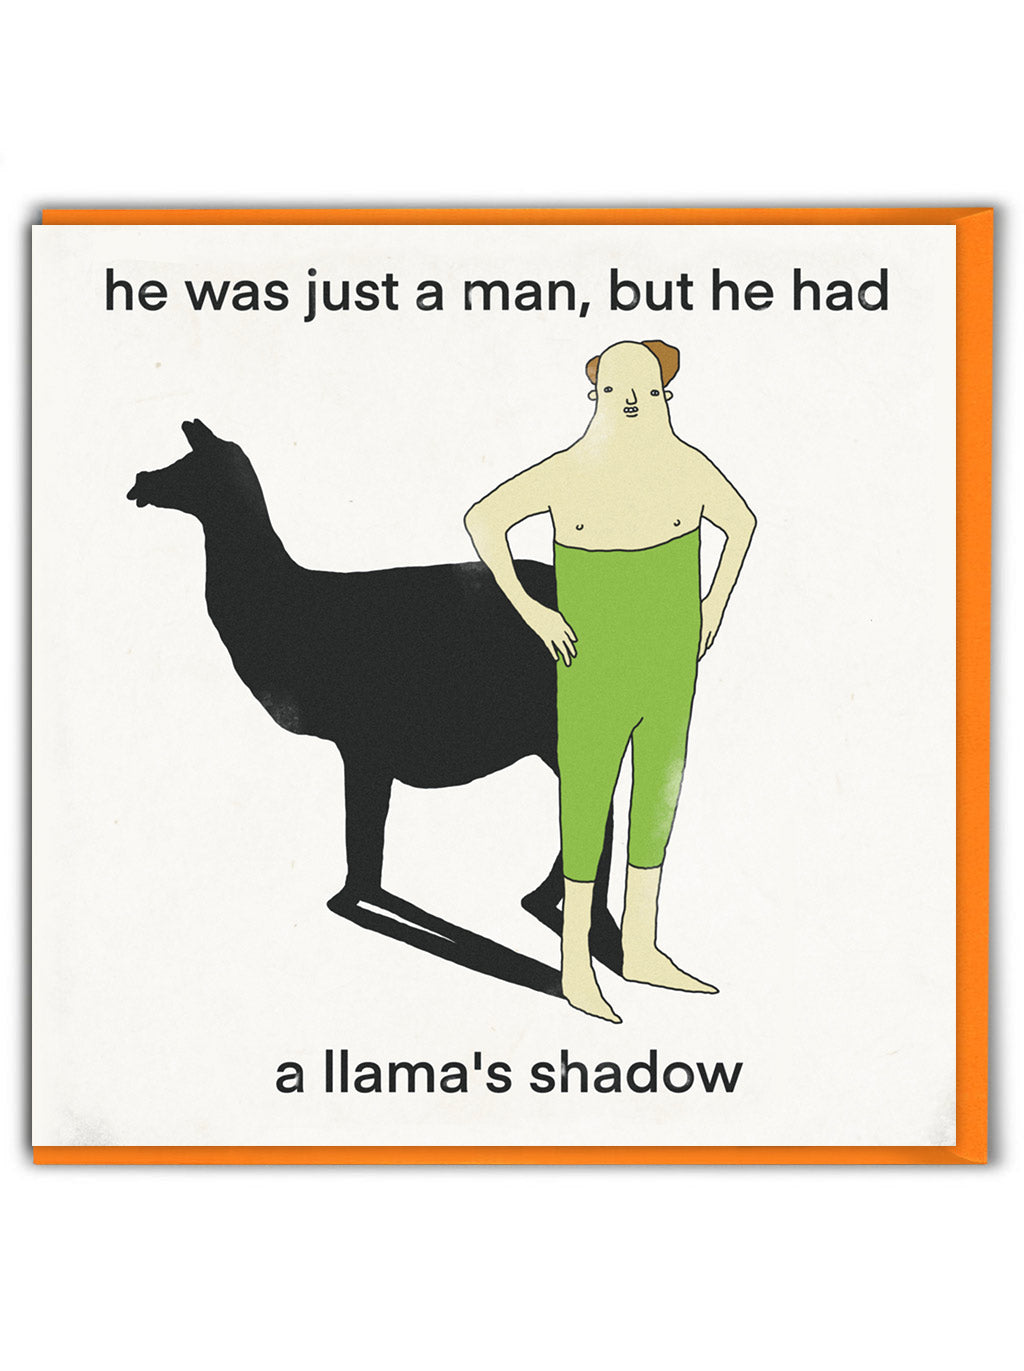 A greetings card with a white background showing a white man with his green trousers pulled up really high and his shadow is the outline of a llama. The words on the card say &#39;he was just a man, but he had a llama&#39;s shadow&#39;.